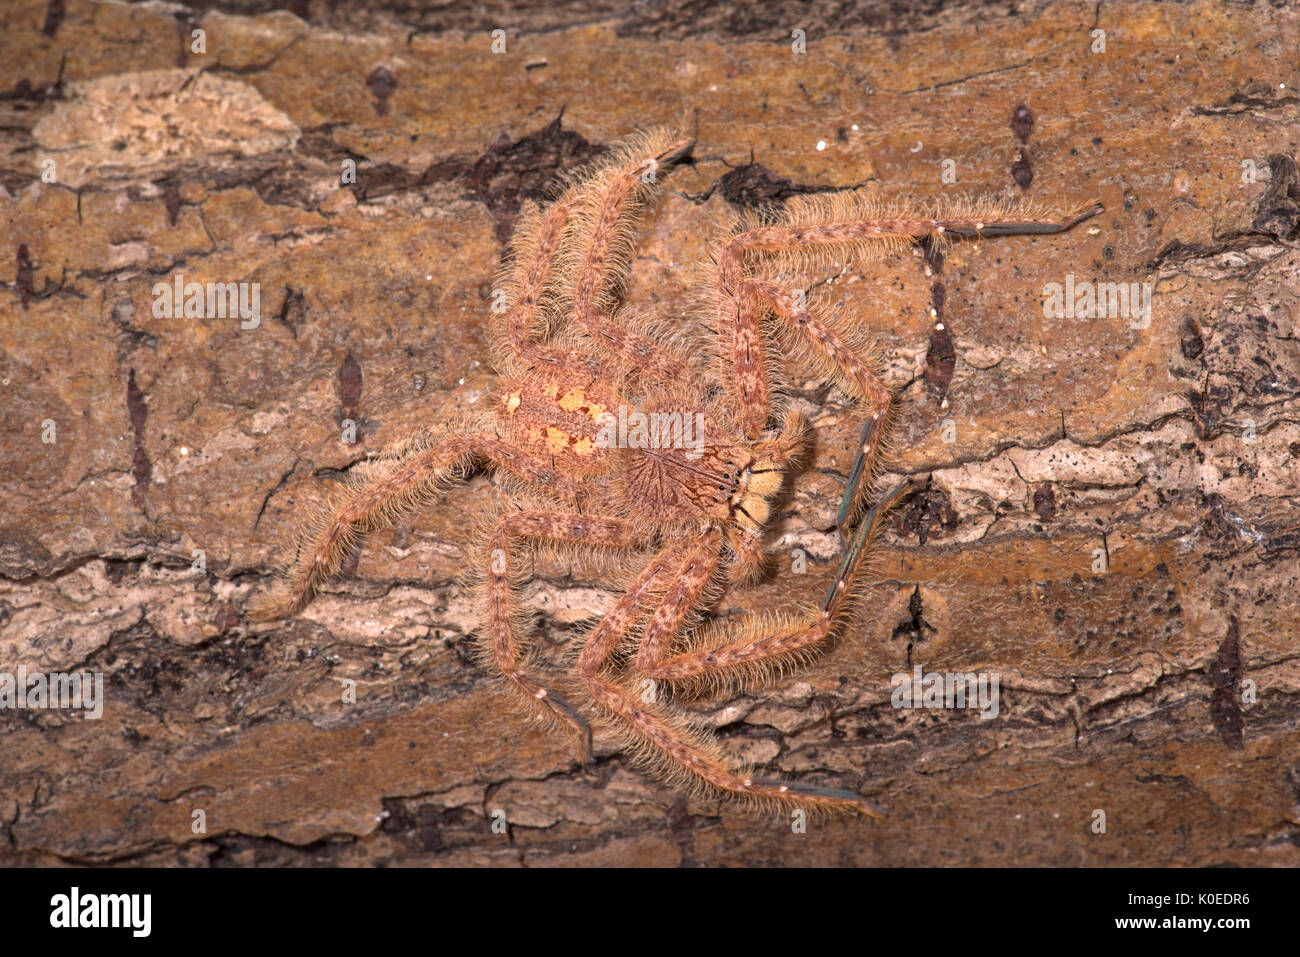 Huntsman Spider, Heteropoda davidbowie, from the Cameron Highlands District in peninsular Malaysia and named in honor of singer David Bowie, reference Stock Photo